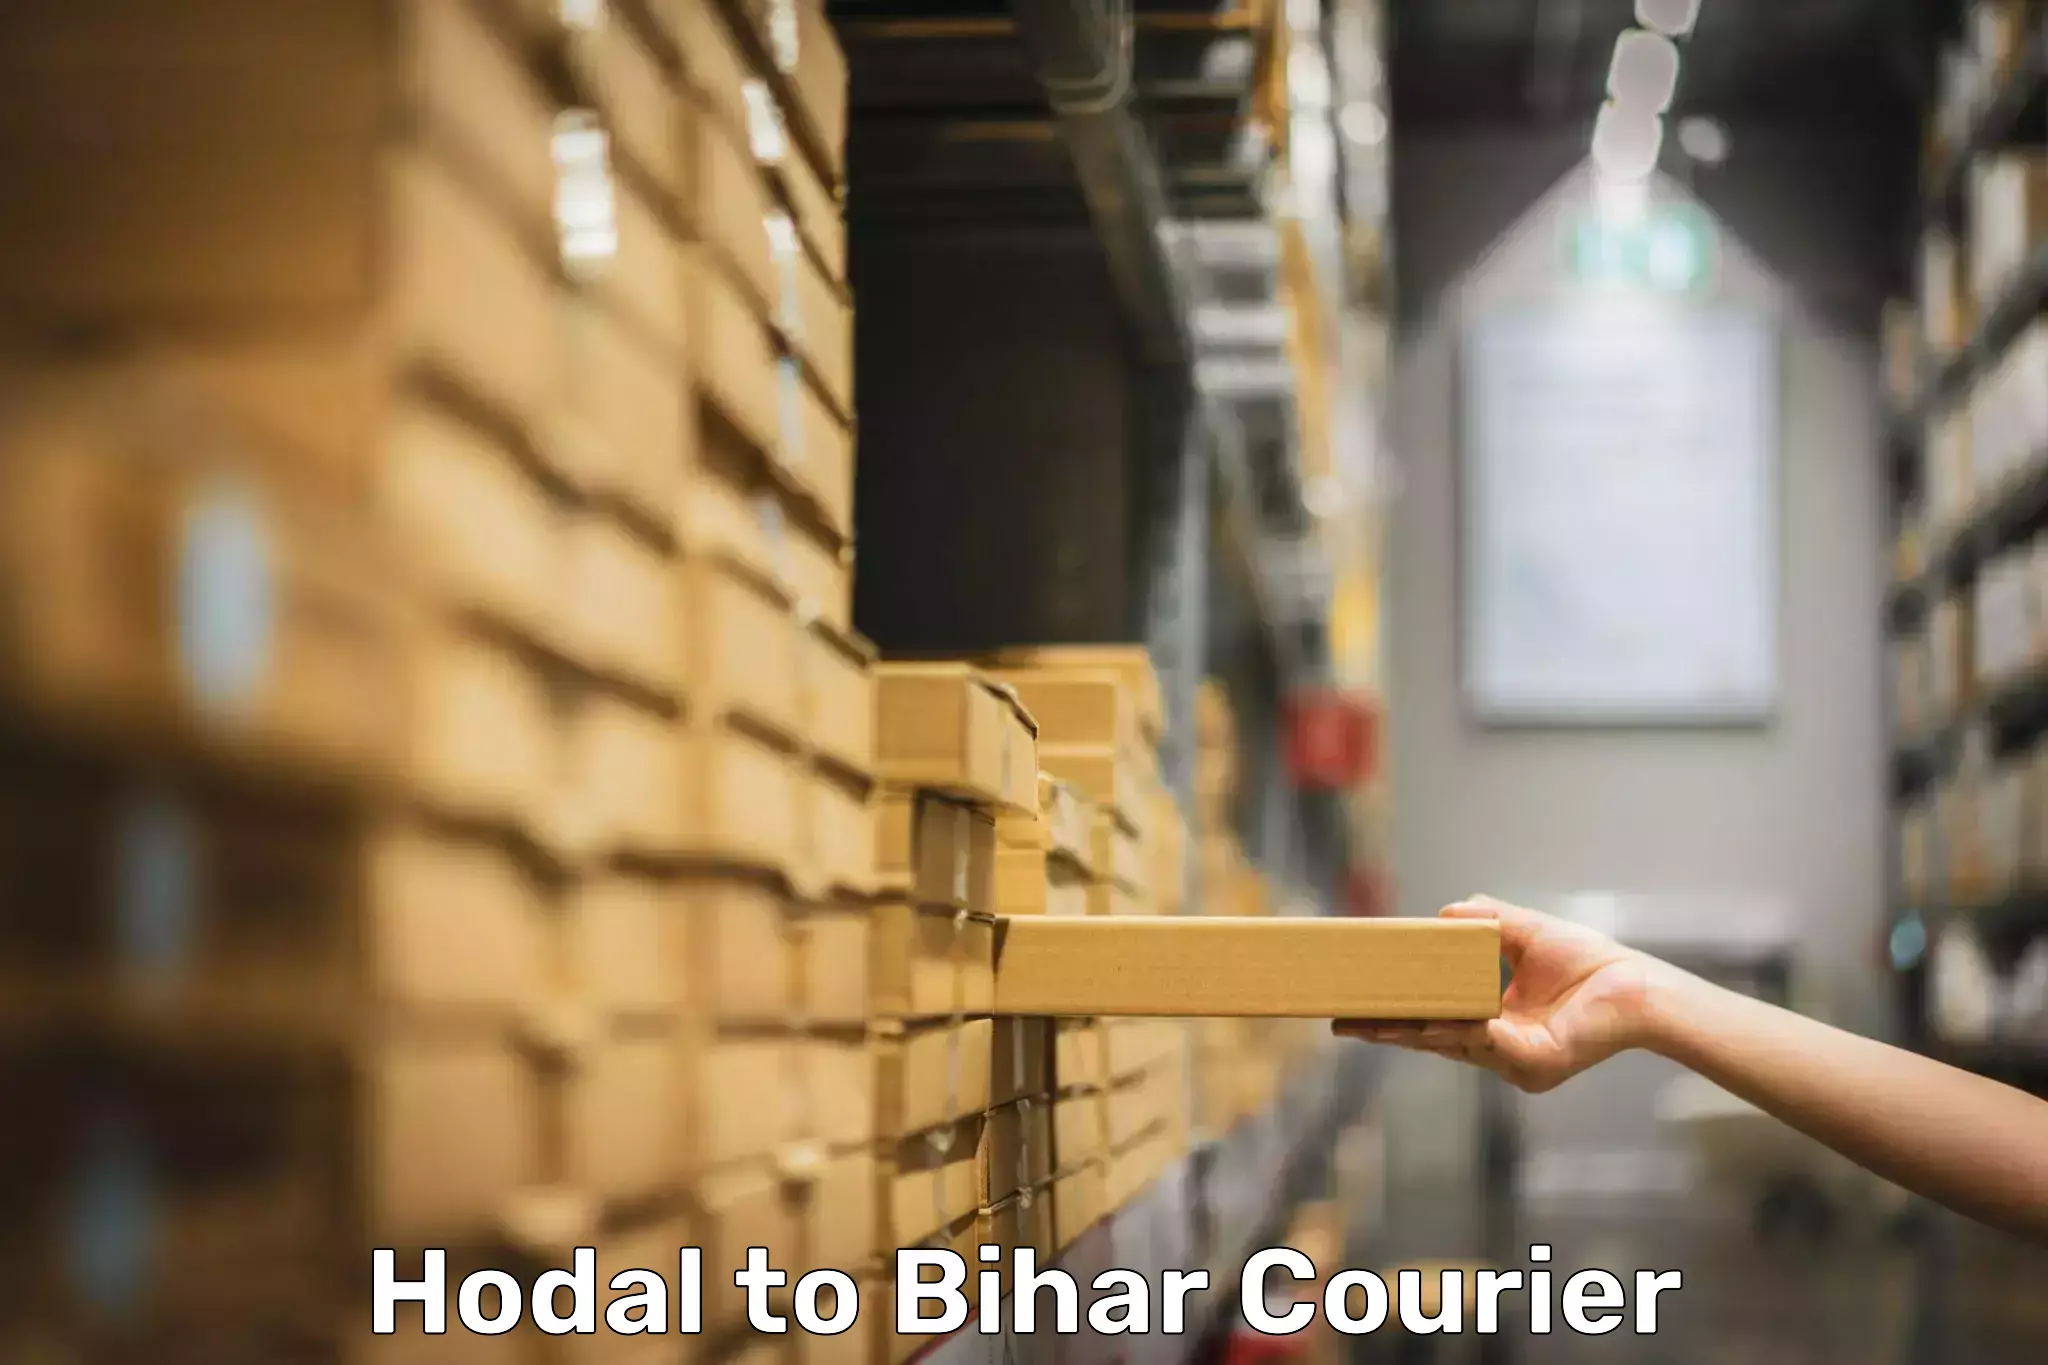 Luggage shipment specialists Hodal to Sheonar